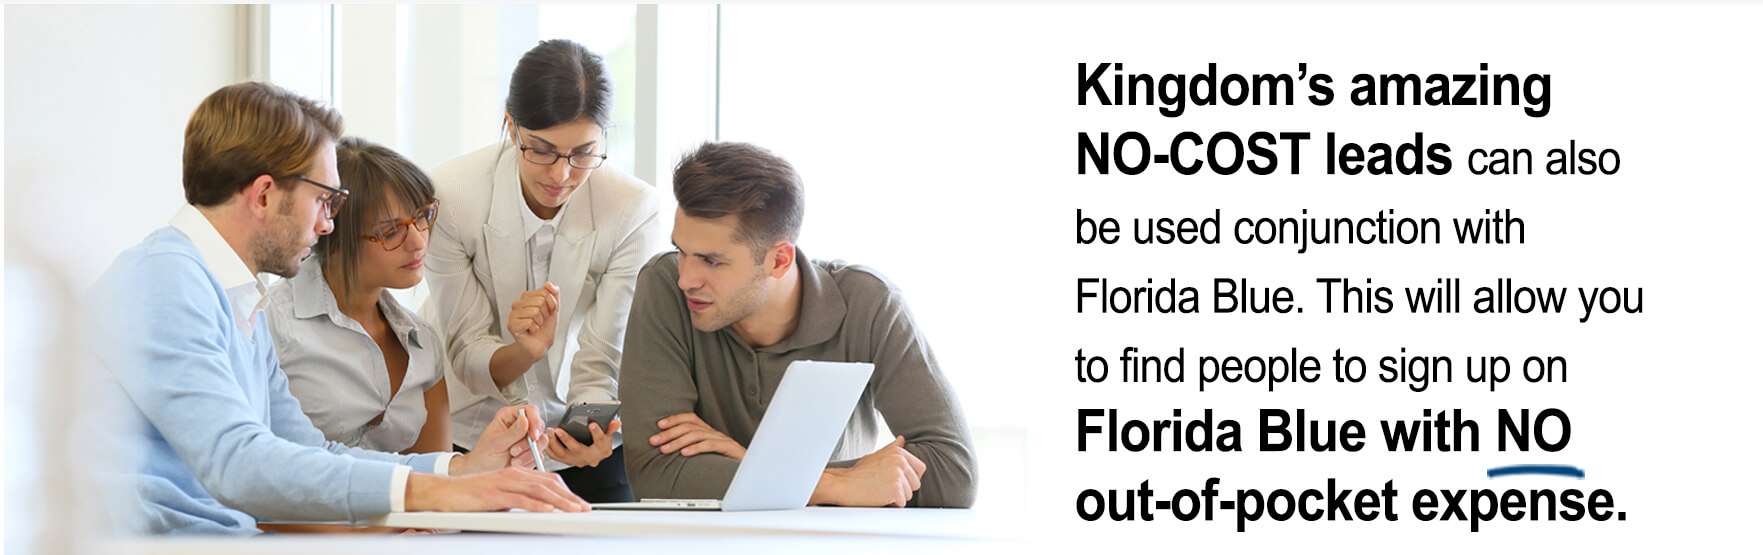 Kingdomâ€™s amazing no-cost leads can also be used in conjunction with Florida Blue. This will allow you to find people to sign up on Florida Blue with no out of pocket expense.